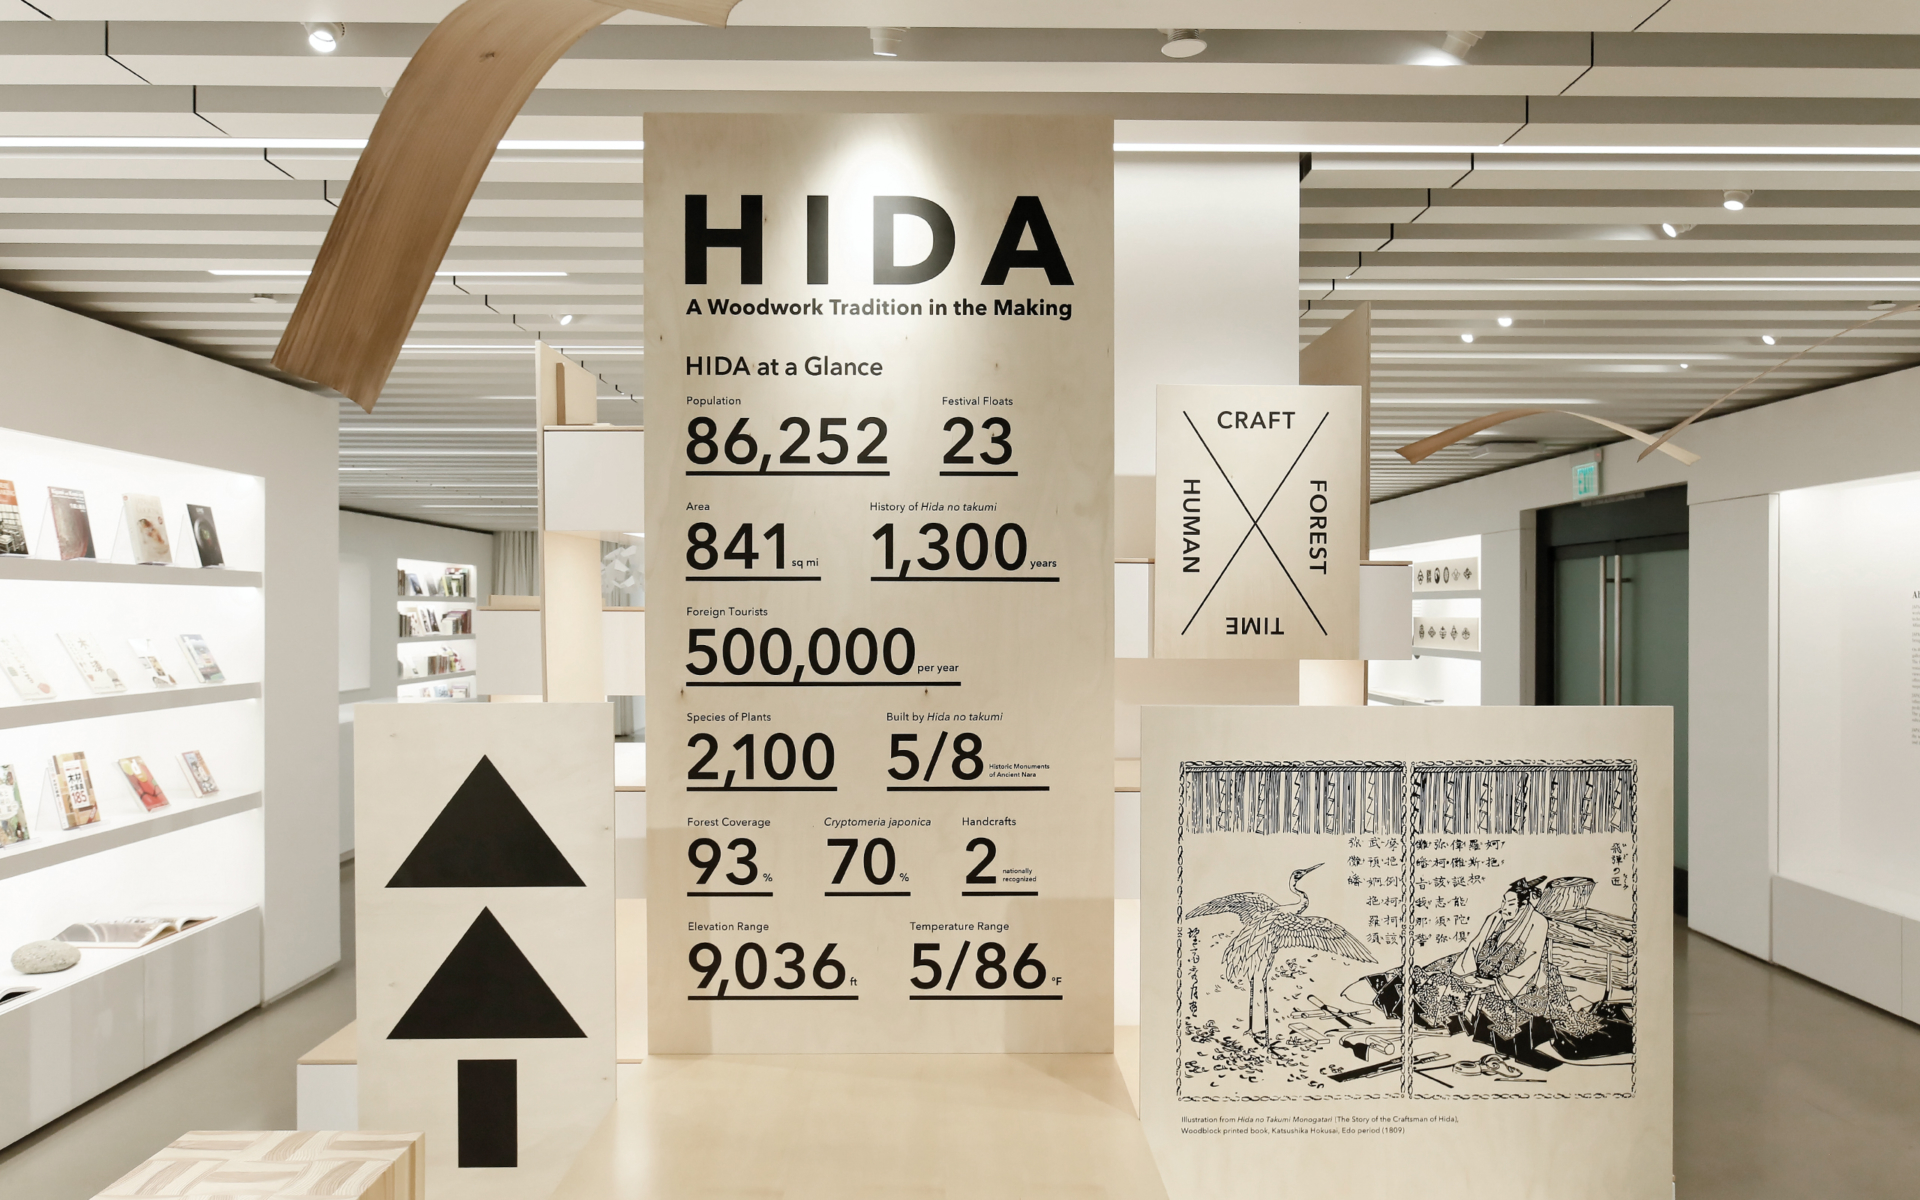 HIDA: A Woodwork Tradition in the Making